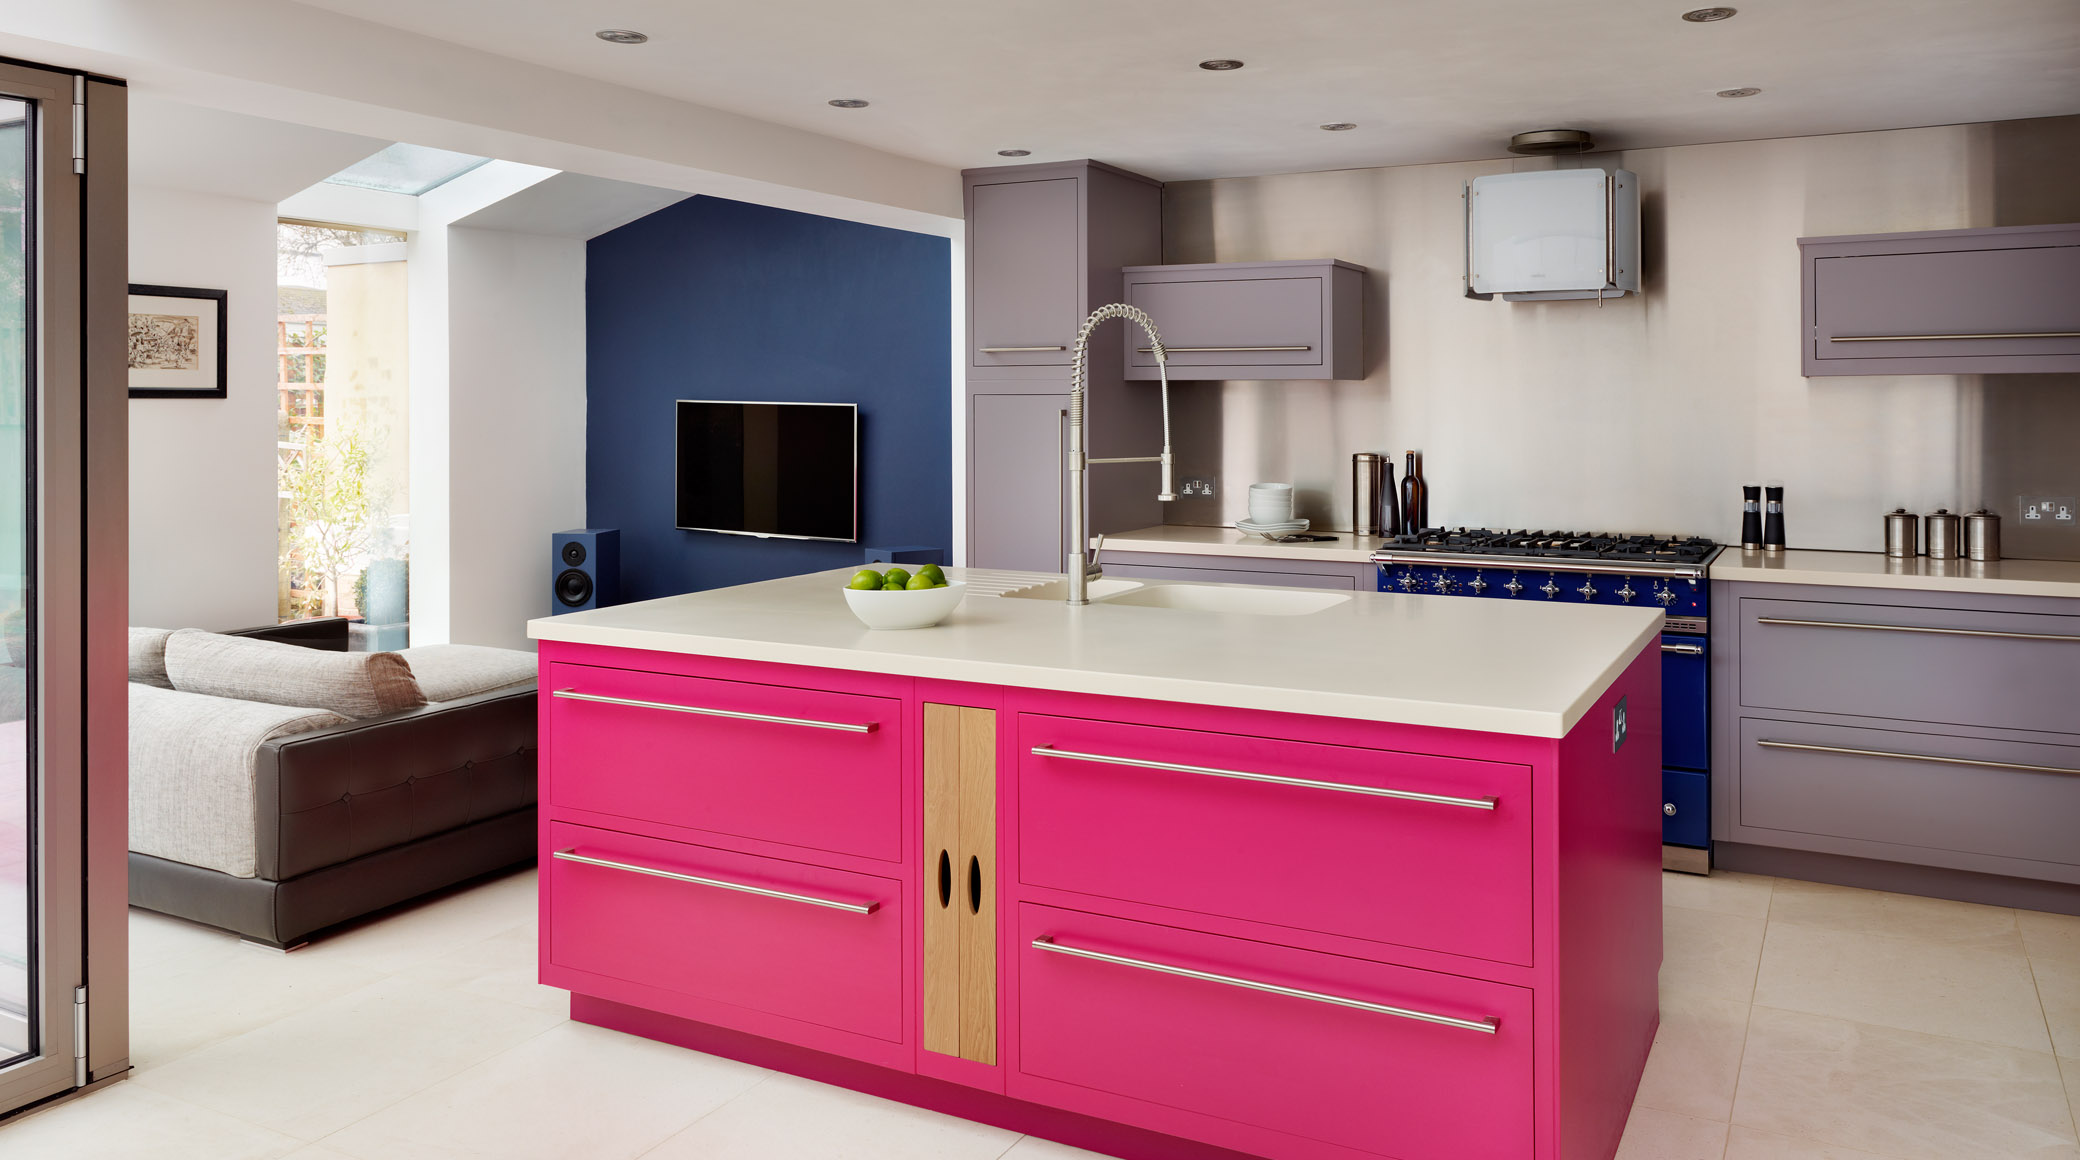 Hot Pink Linear Kitchen Print Email Handpainted Kitchens Give You